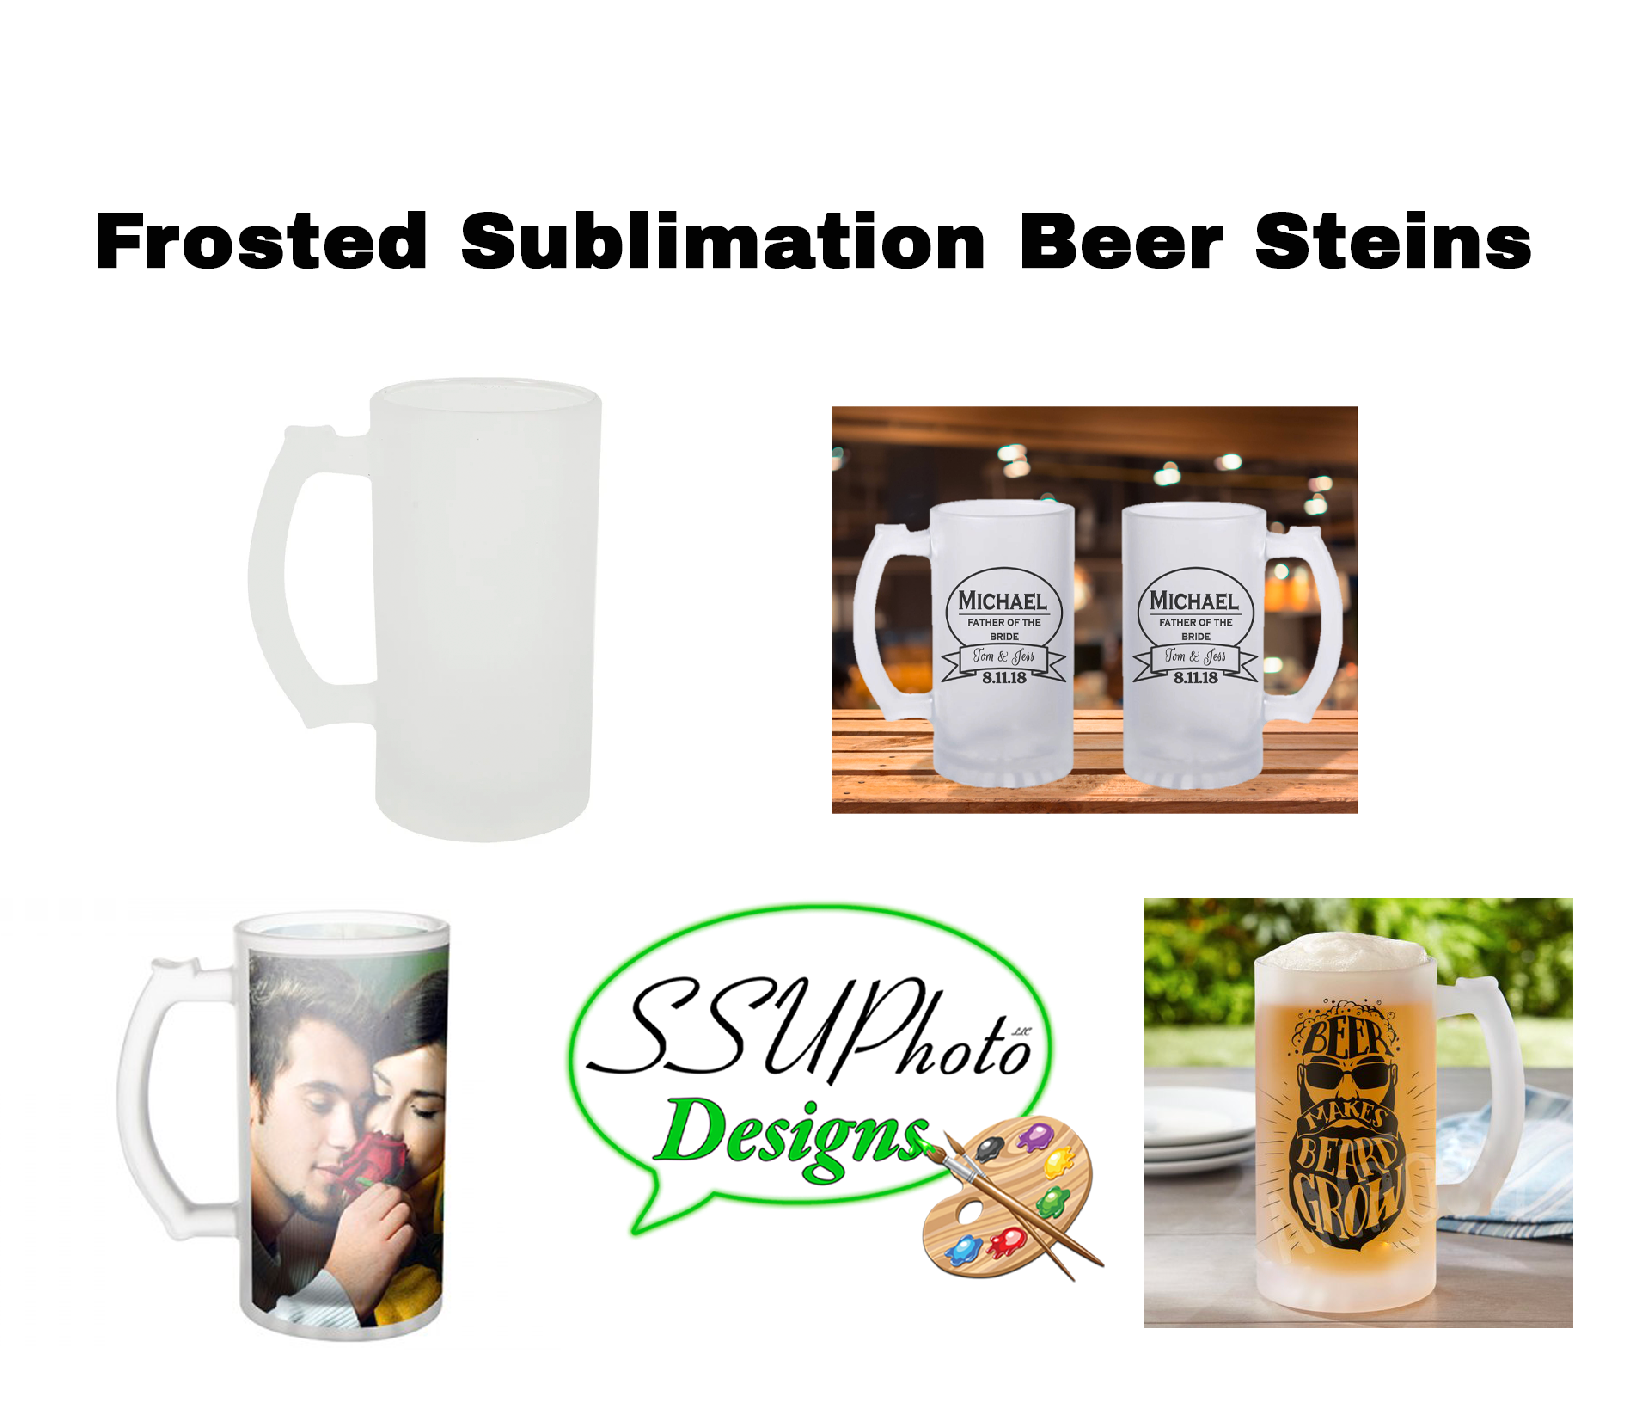 Frosted Sublimation Beer Steins